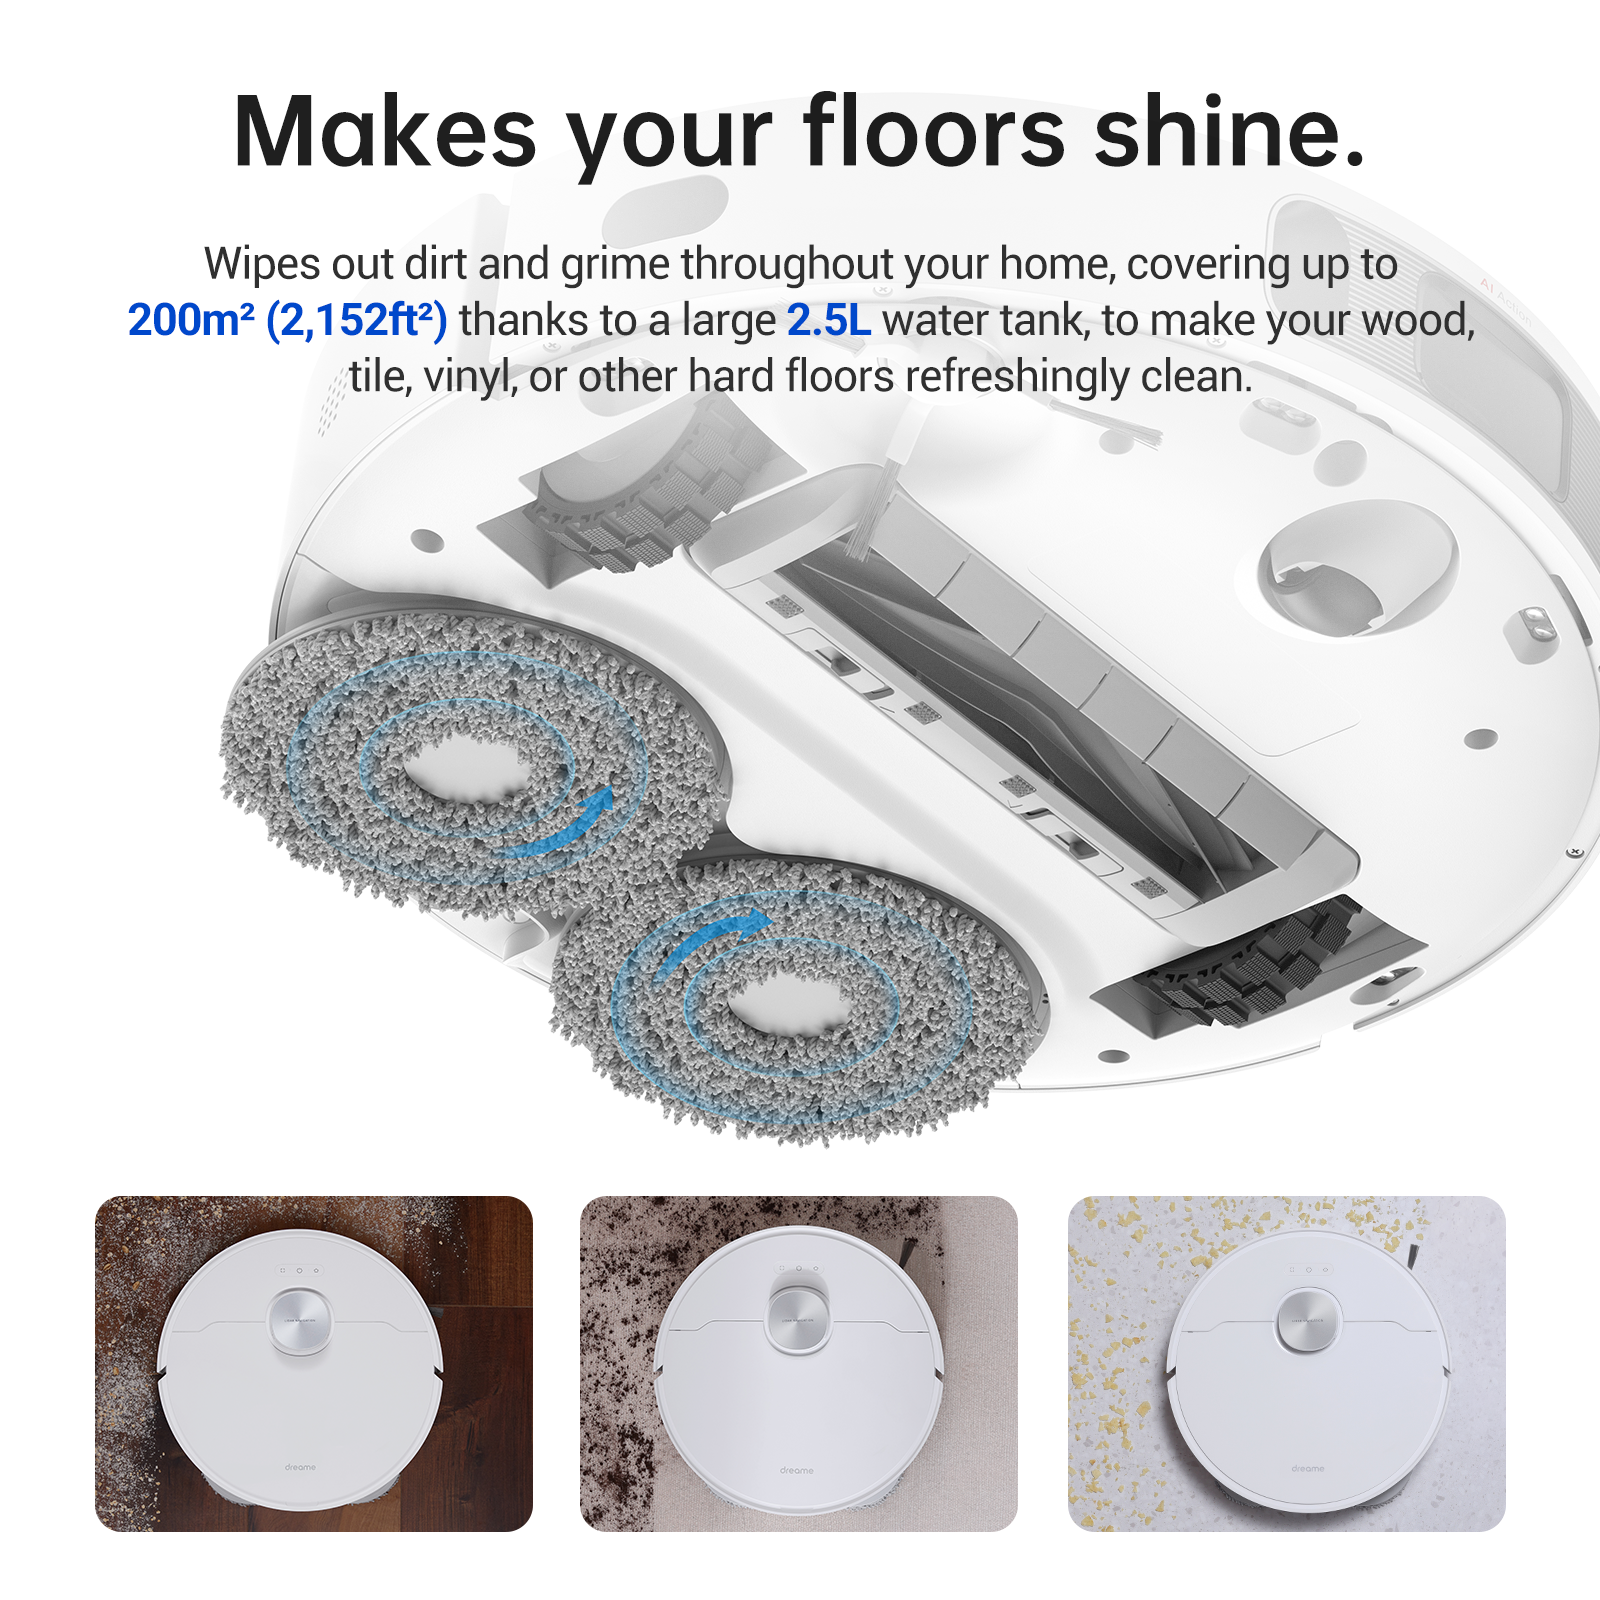 Dreame L10S Ultra Robot Vacuum Cleaner